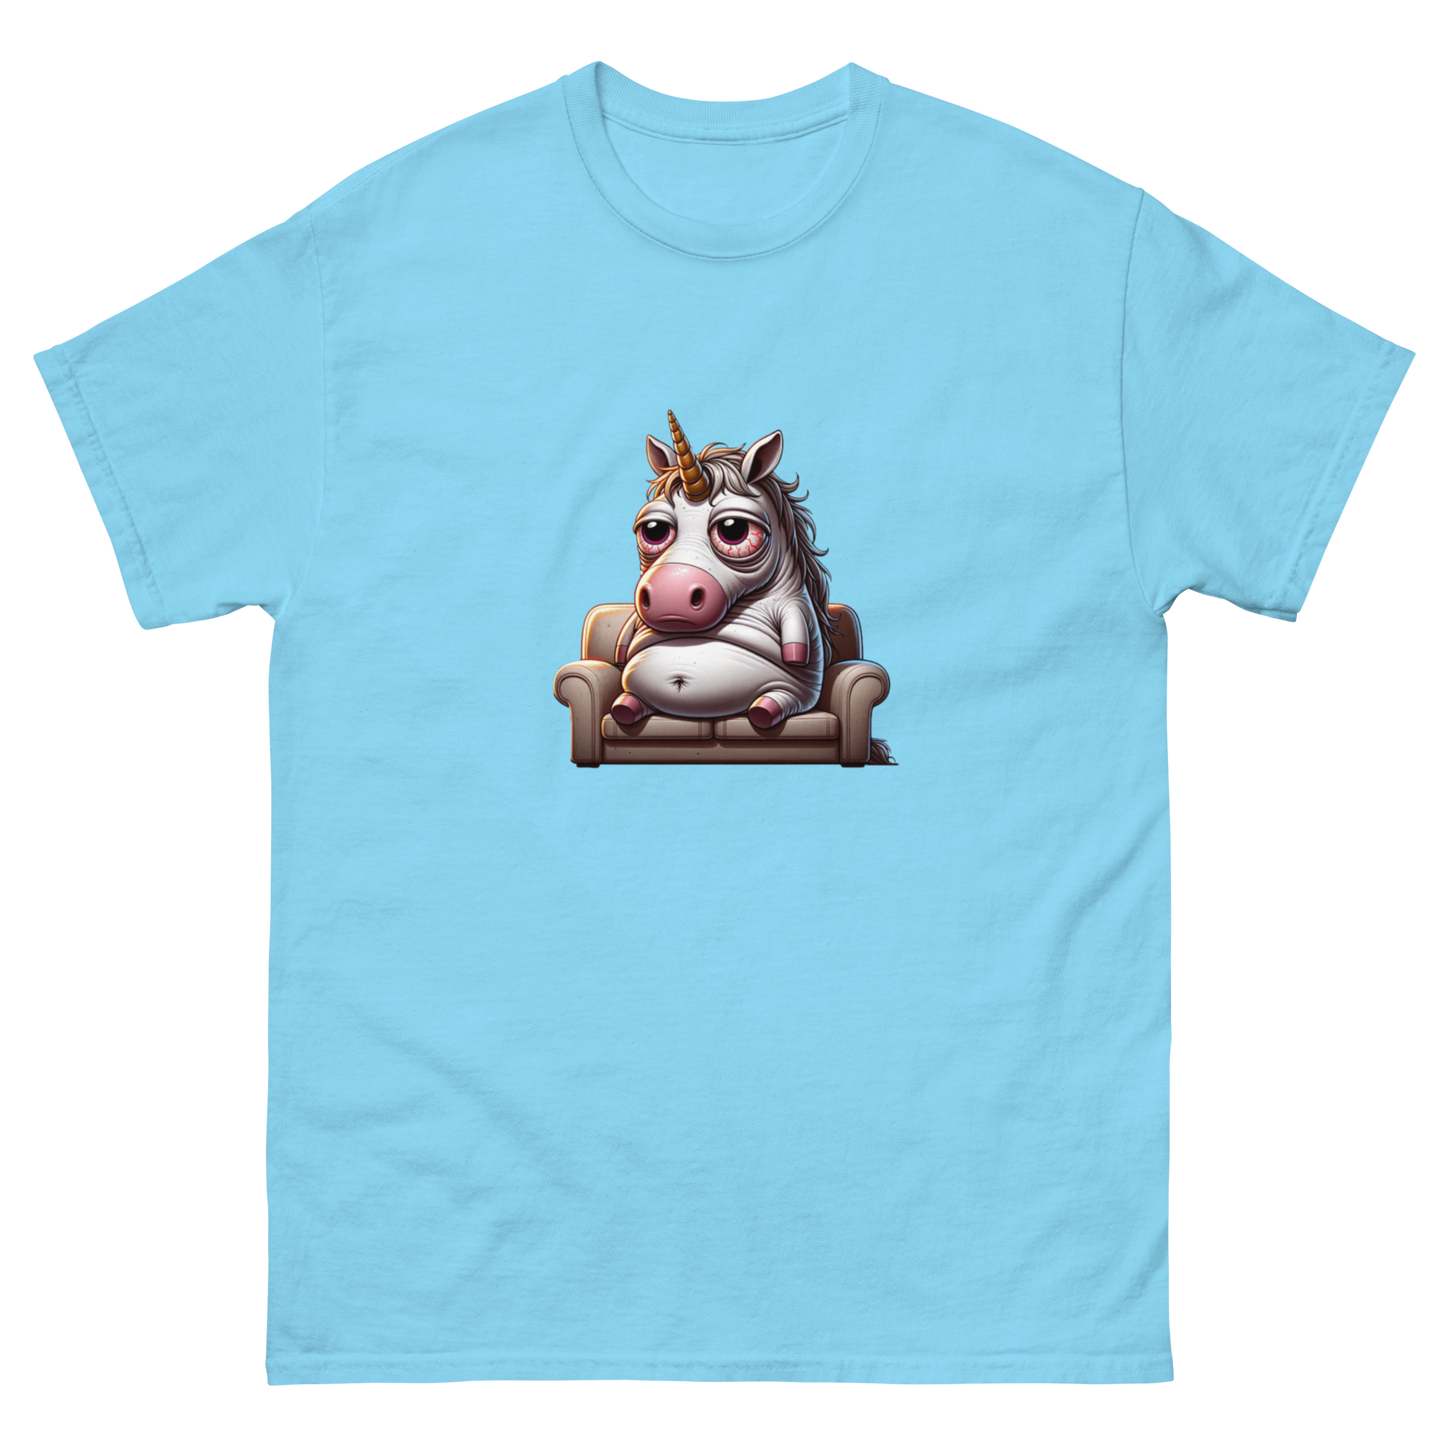 Humorous t-shirt with a cartoon illustration of a laid-back, overweight unicorn lounging on a couch, looking relaxed with bloodshot eyes, capturing a whimsical and slightly rebellious vibe. Perfect for adding a touch of humor and fantasy to your wardrobe